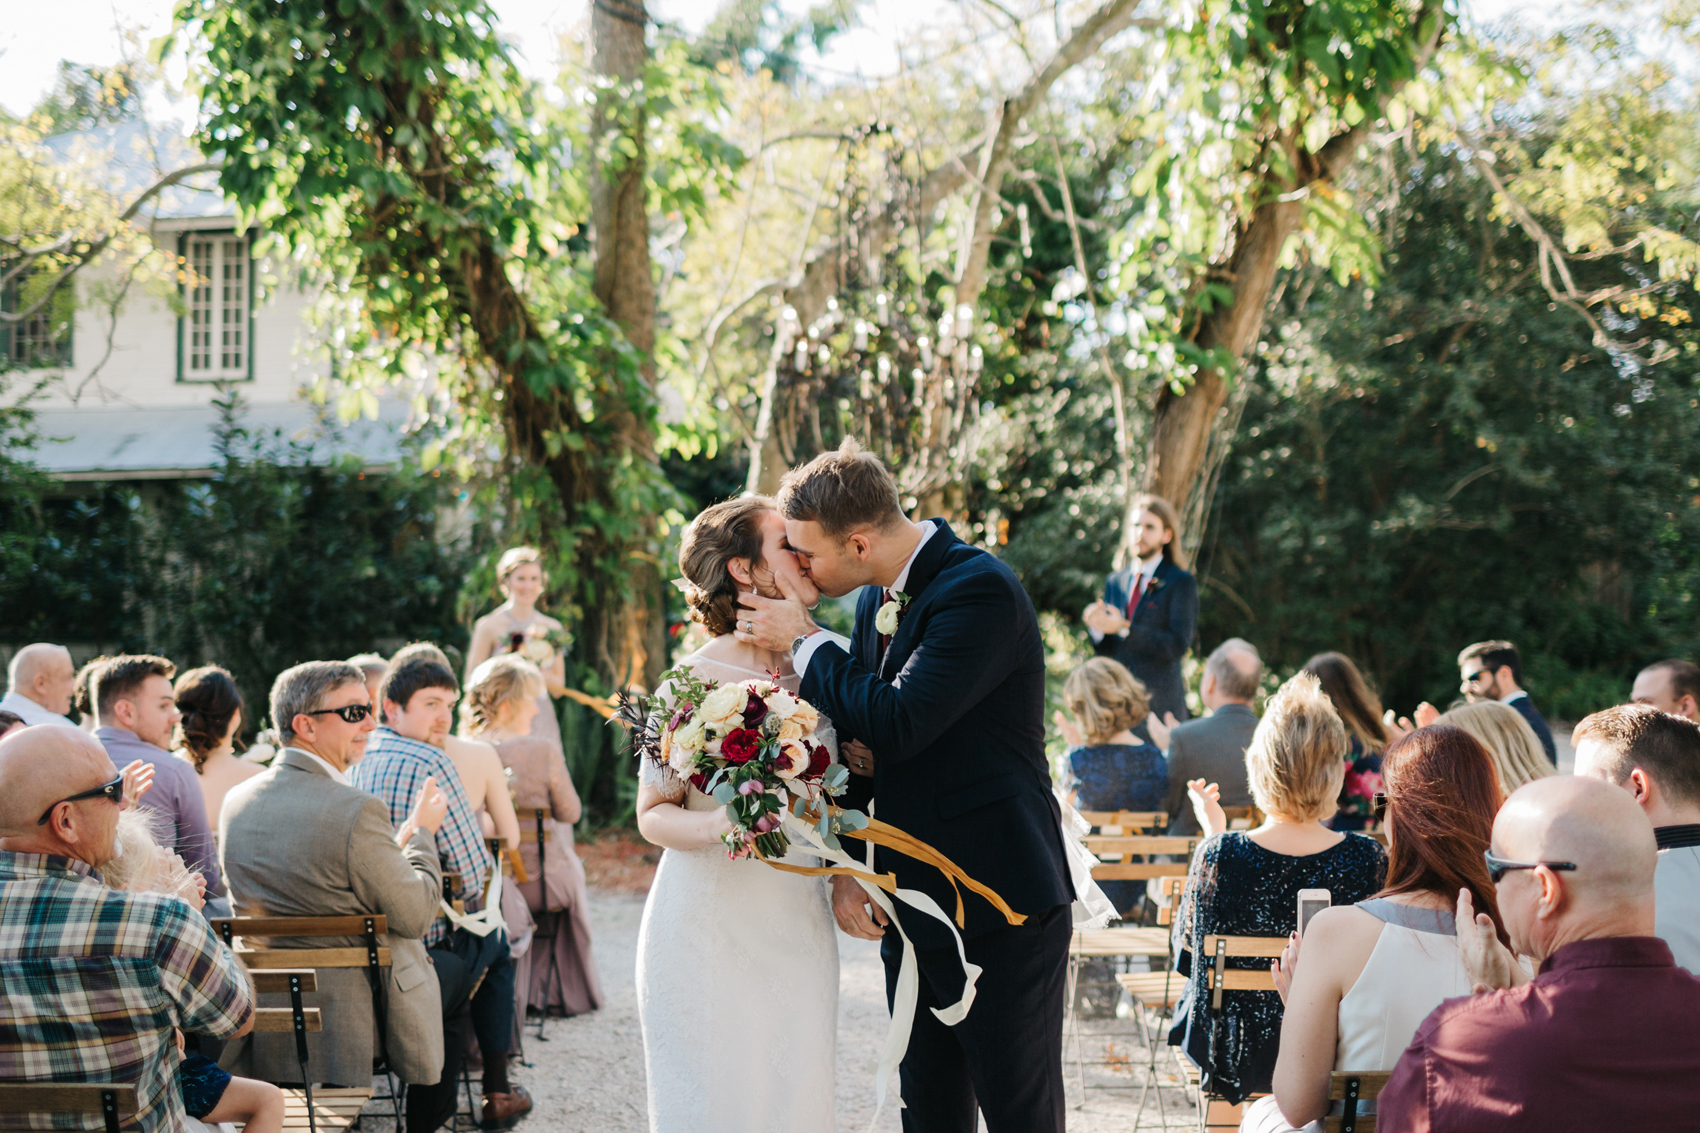 Bride and groom sharing their first kiss at the eclectic romantic secret garden ceremony